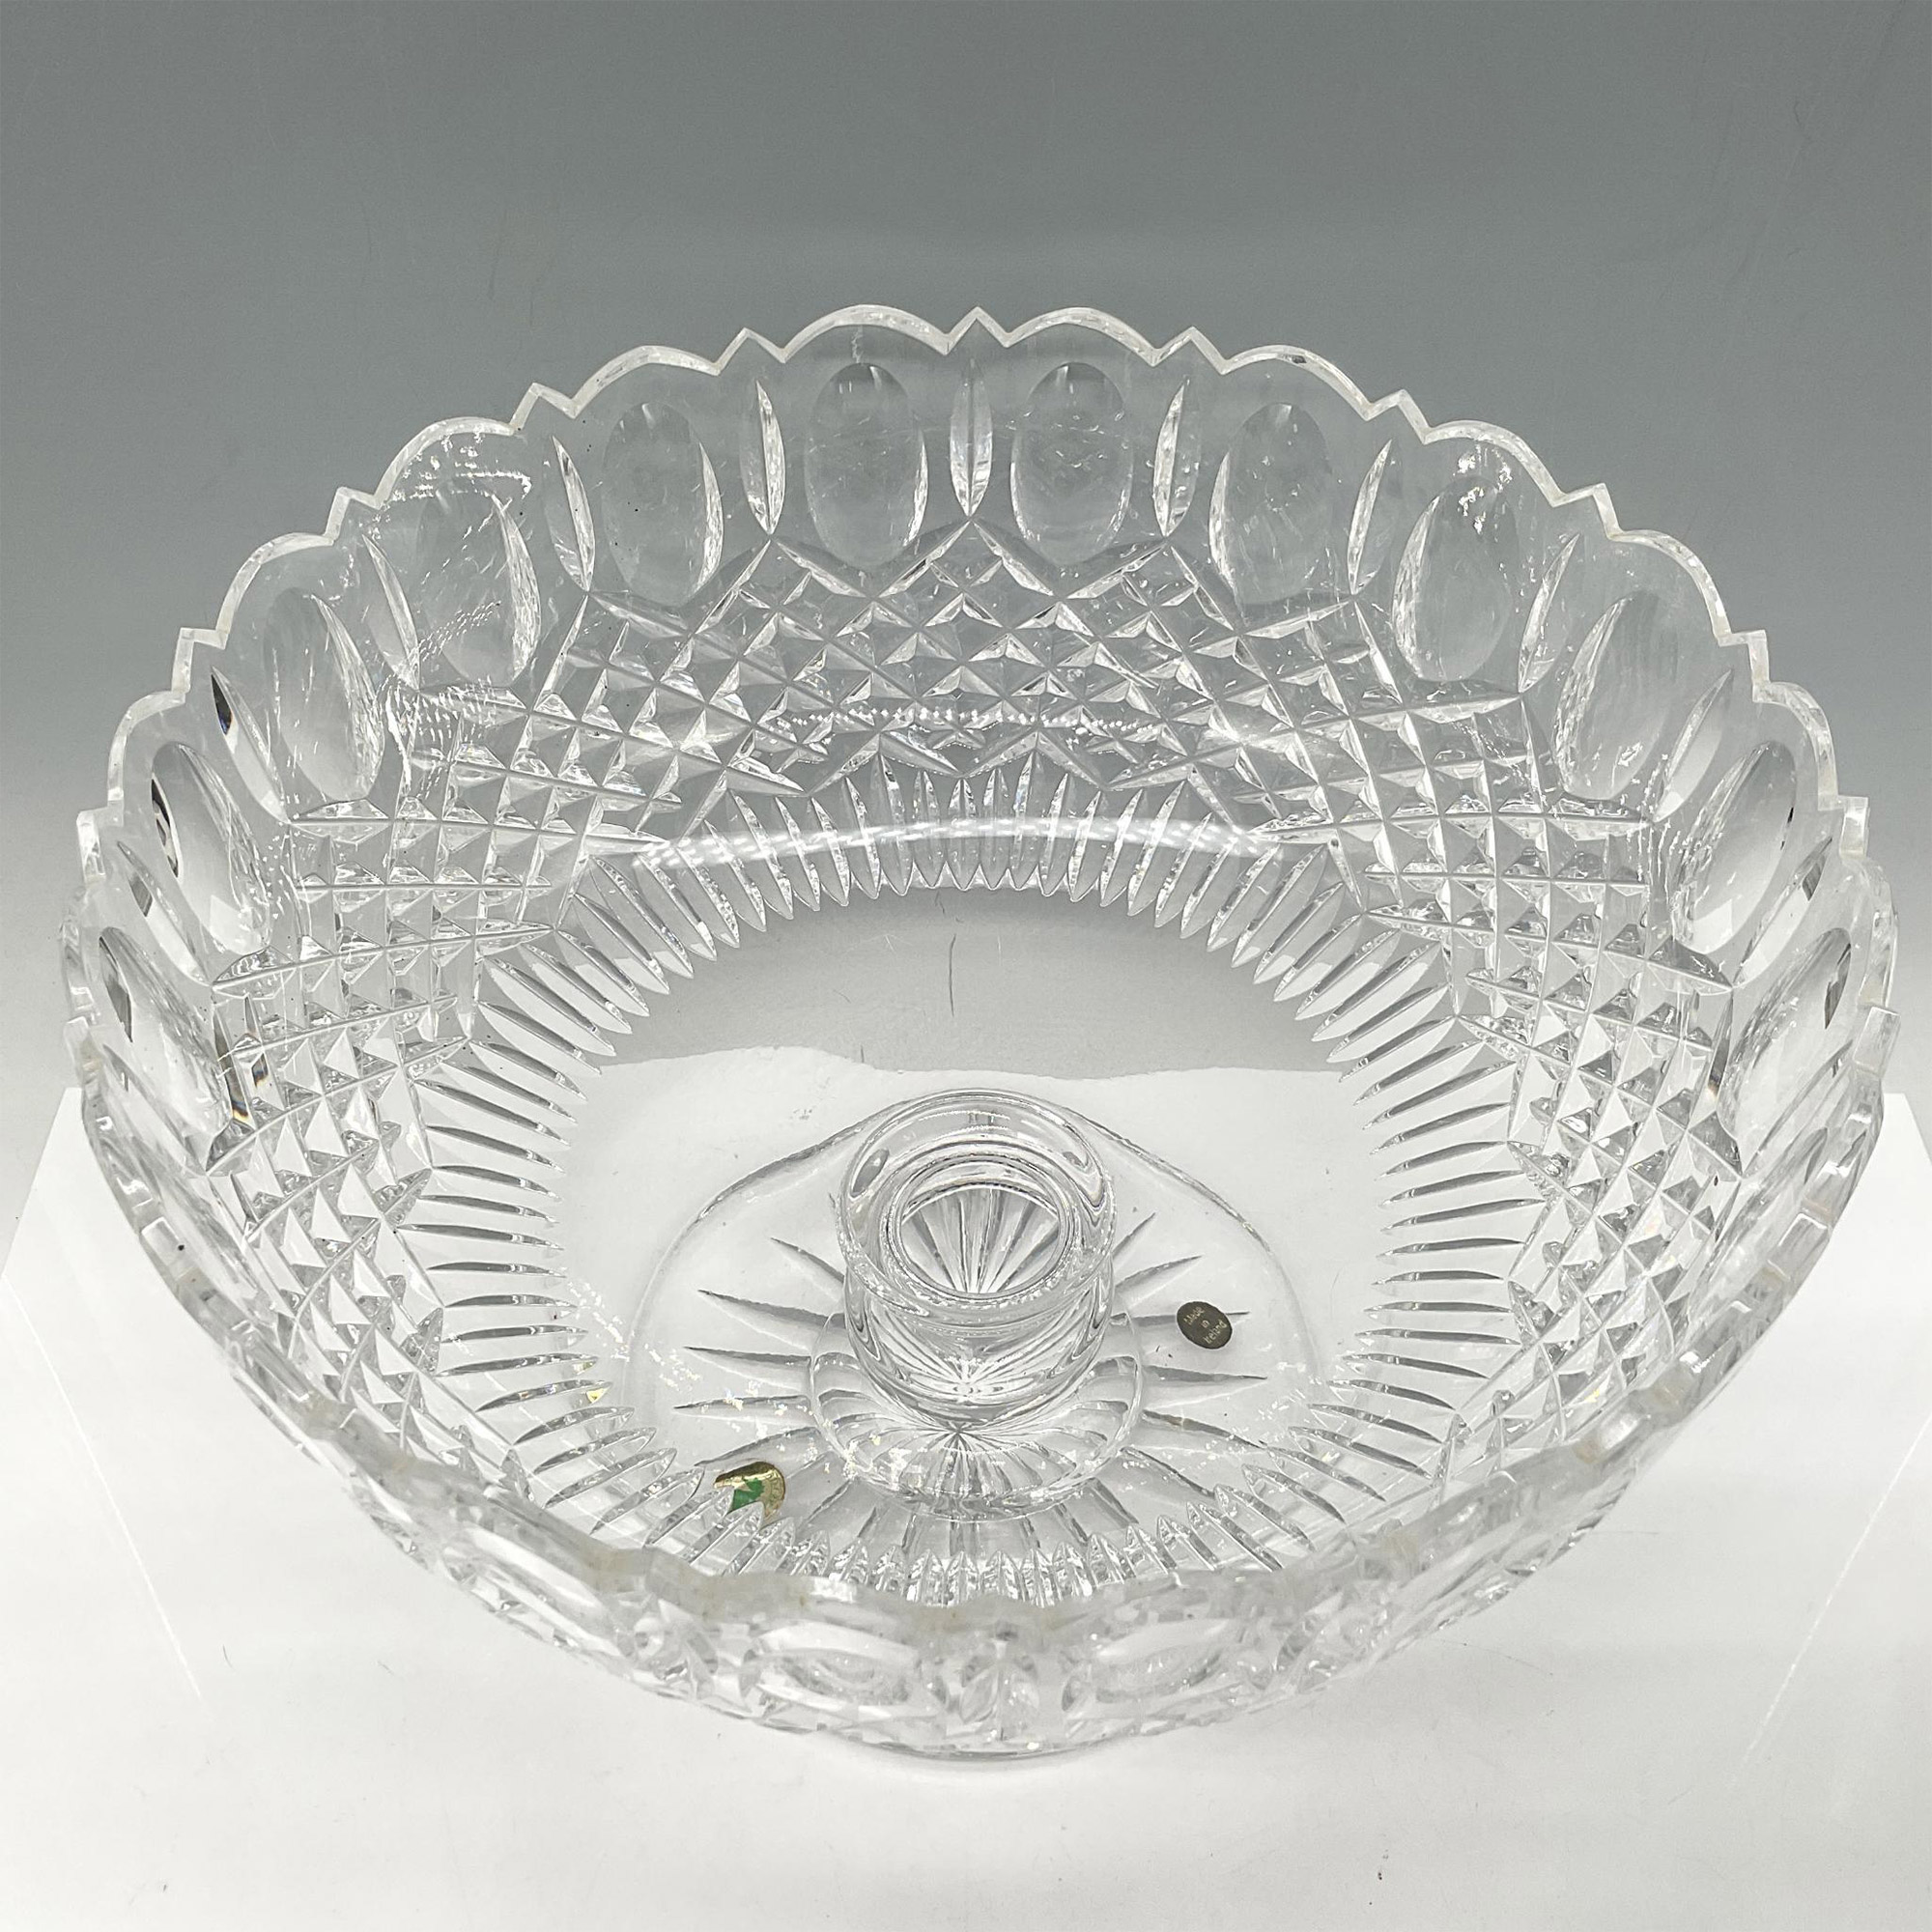 Waterford Crystal Footed Punch Bowl - Image 2 of 3